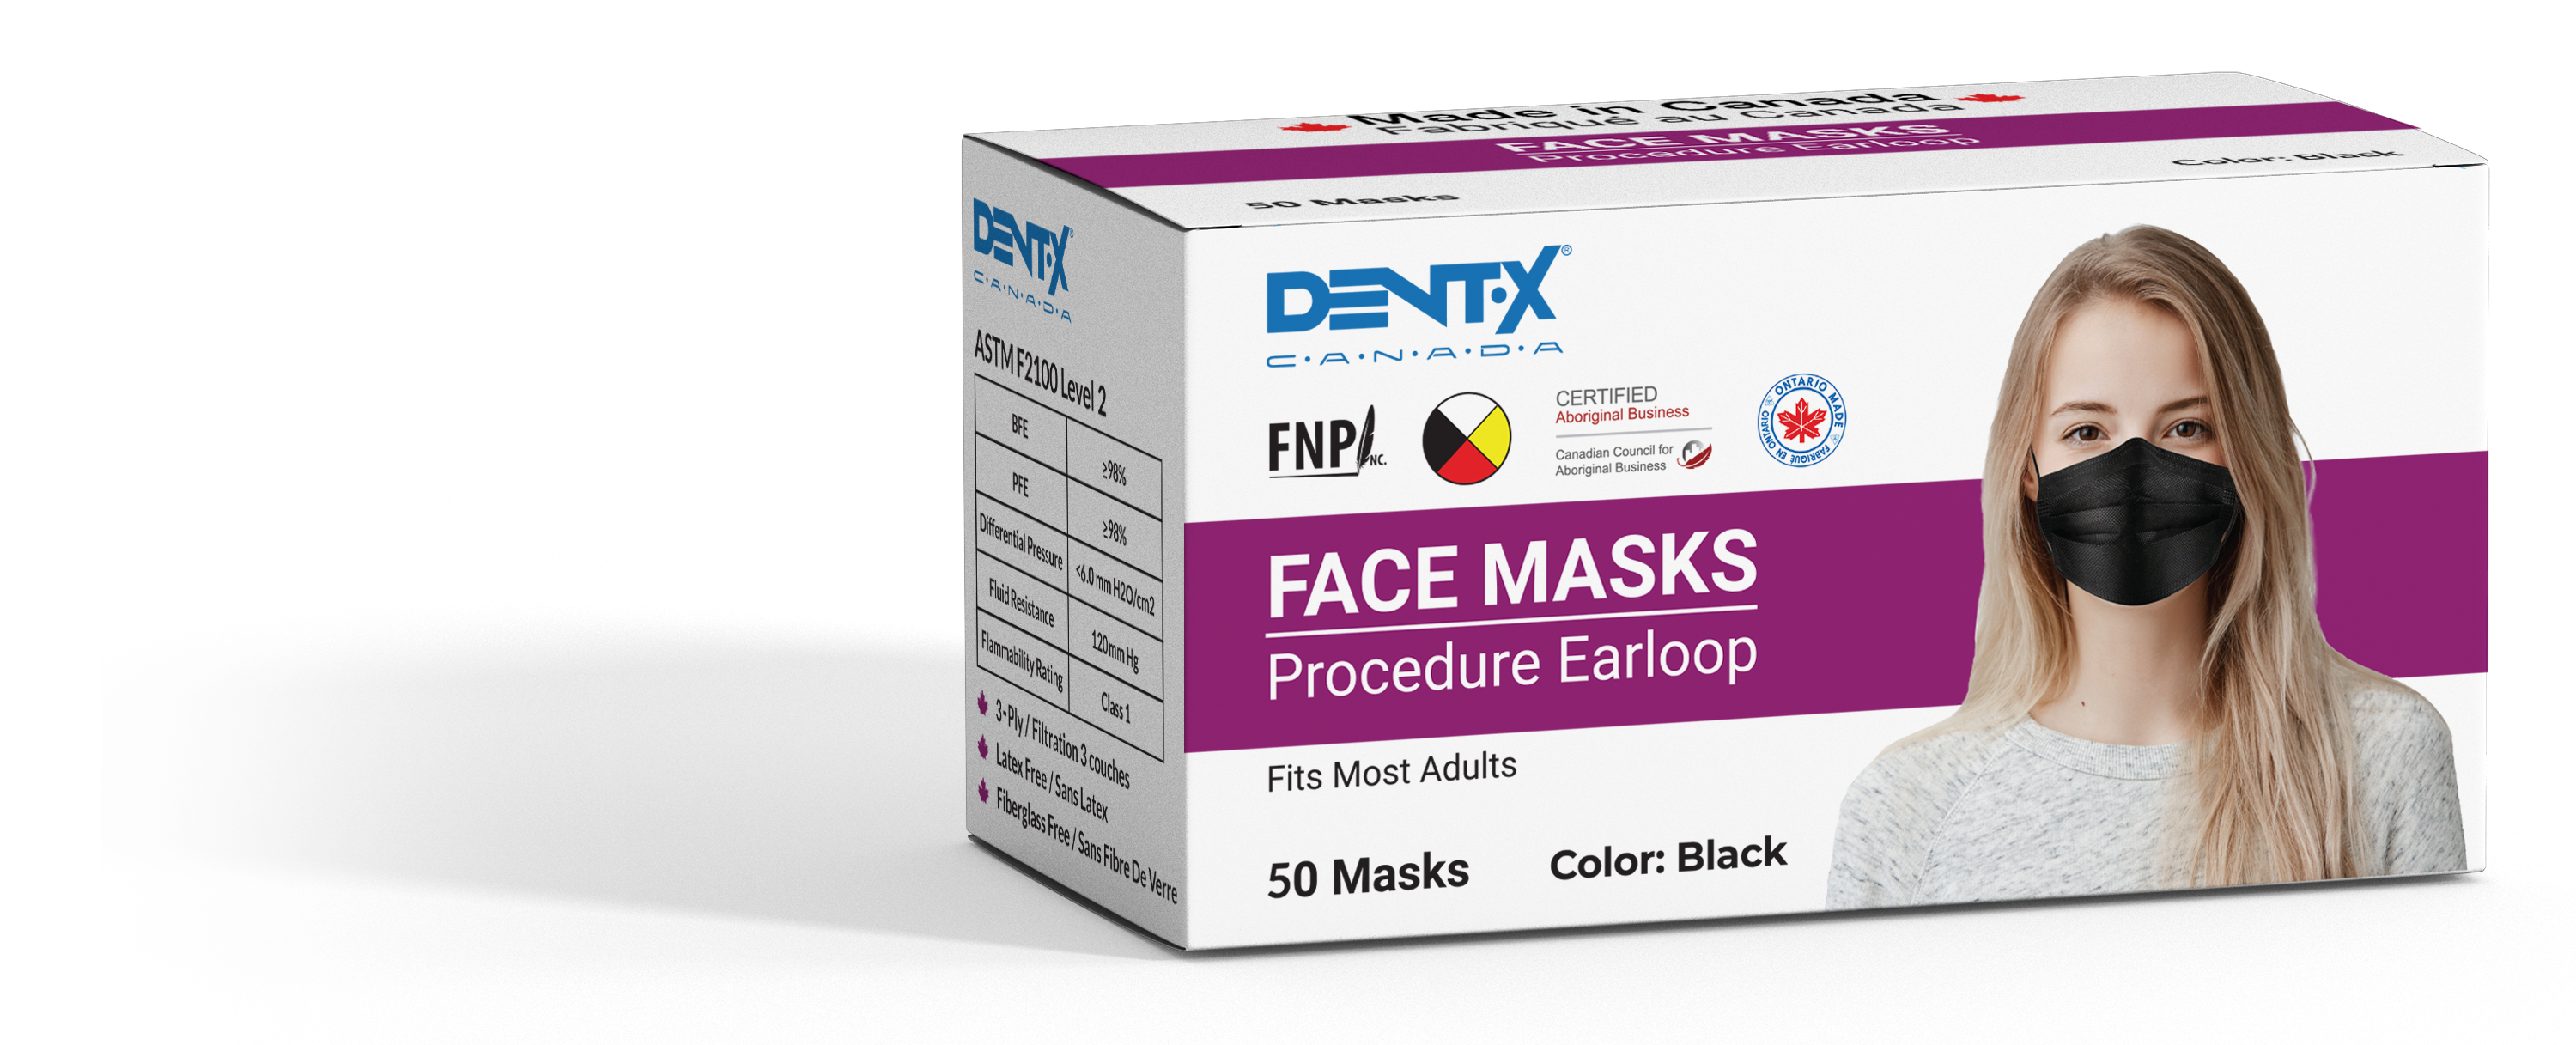 Dent-X BLACK LEVEL 2 ASTM earloop face masks 50/box with security wrap - Made in Canada-2